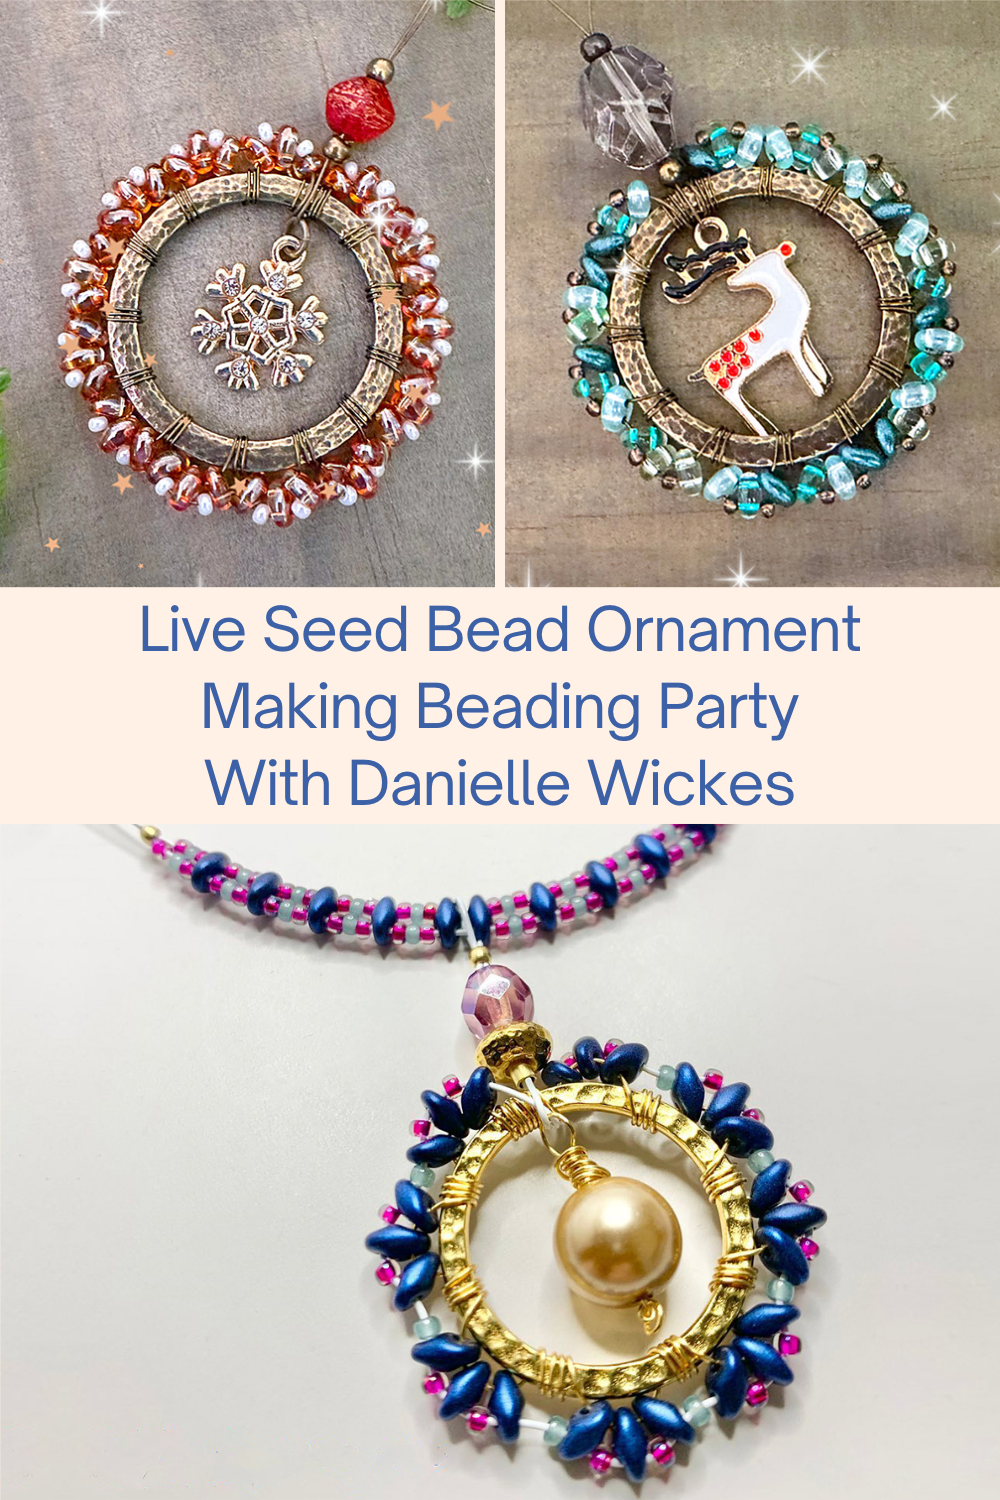 Live Seed Bead Ornament Making Beading Party With Danielle Wickes Collage